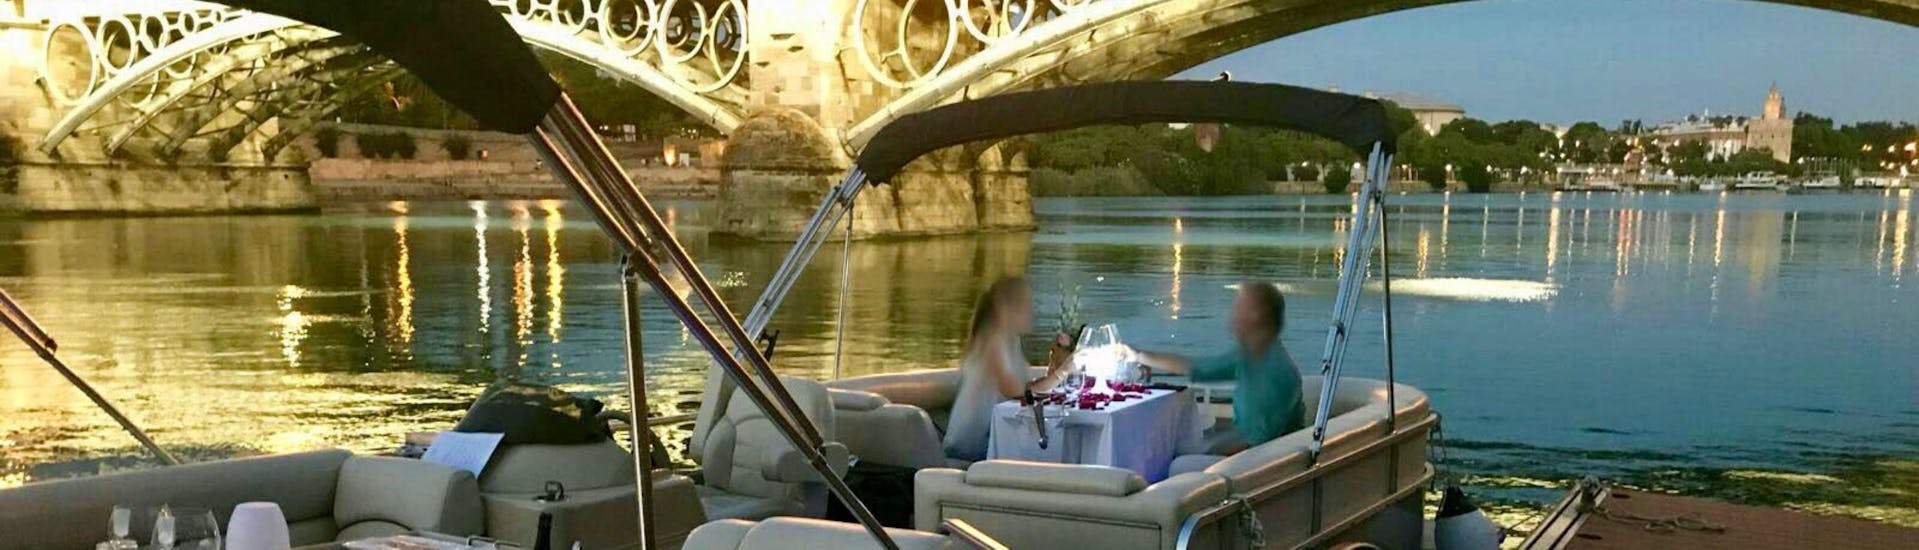 Private Sightseeing Boat Trip with Dinner in Seville.